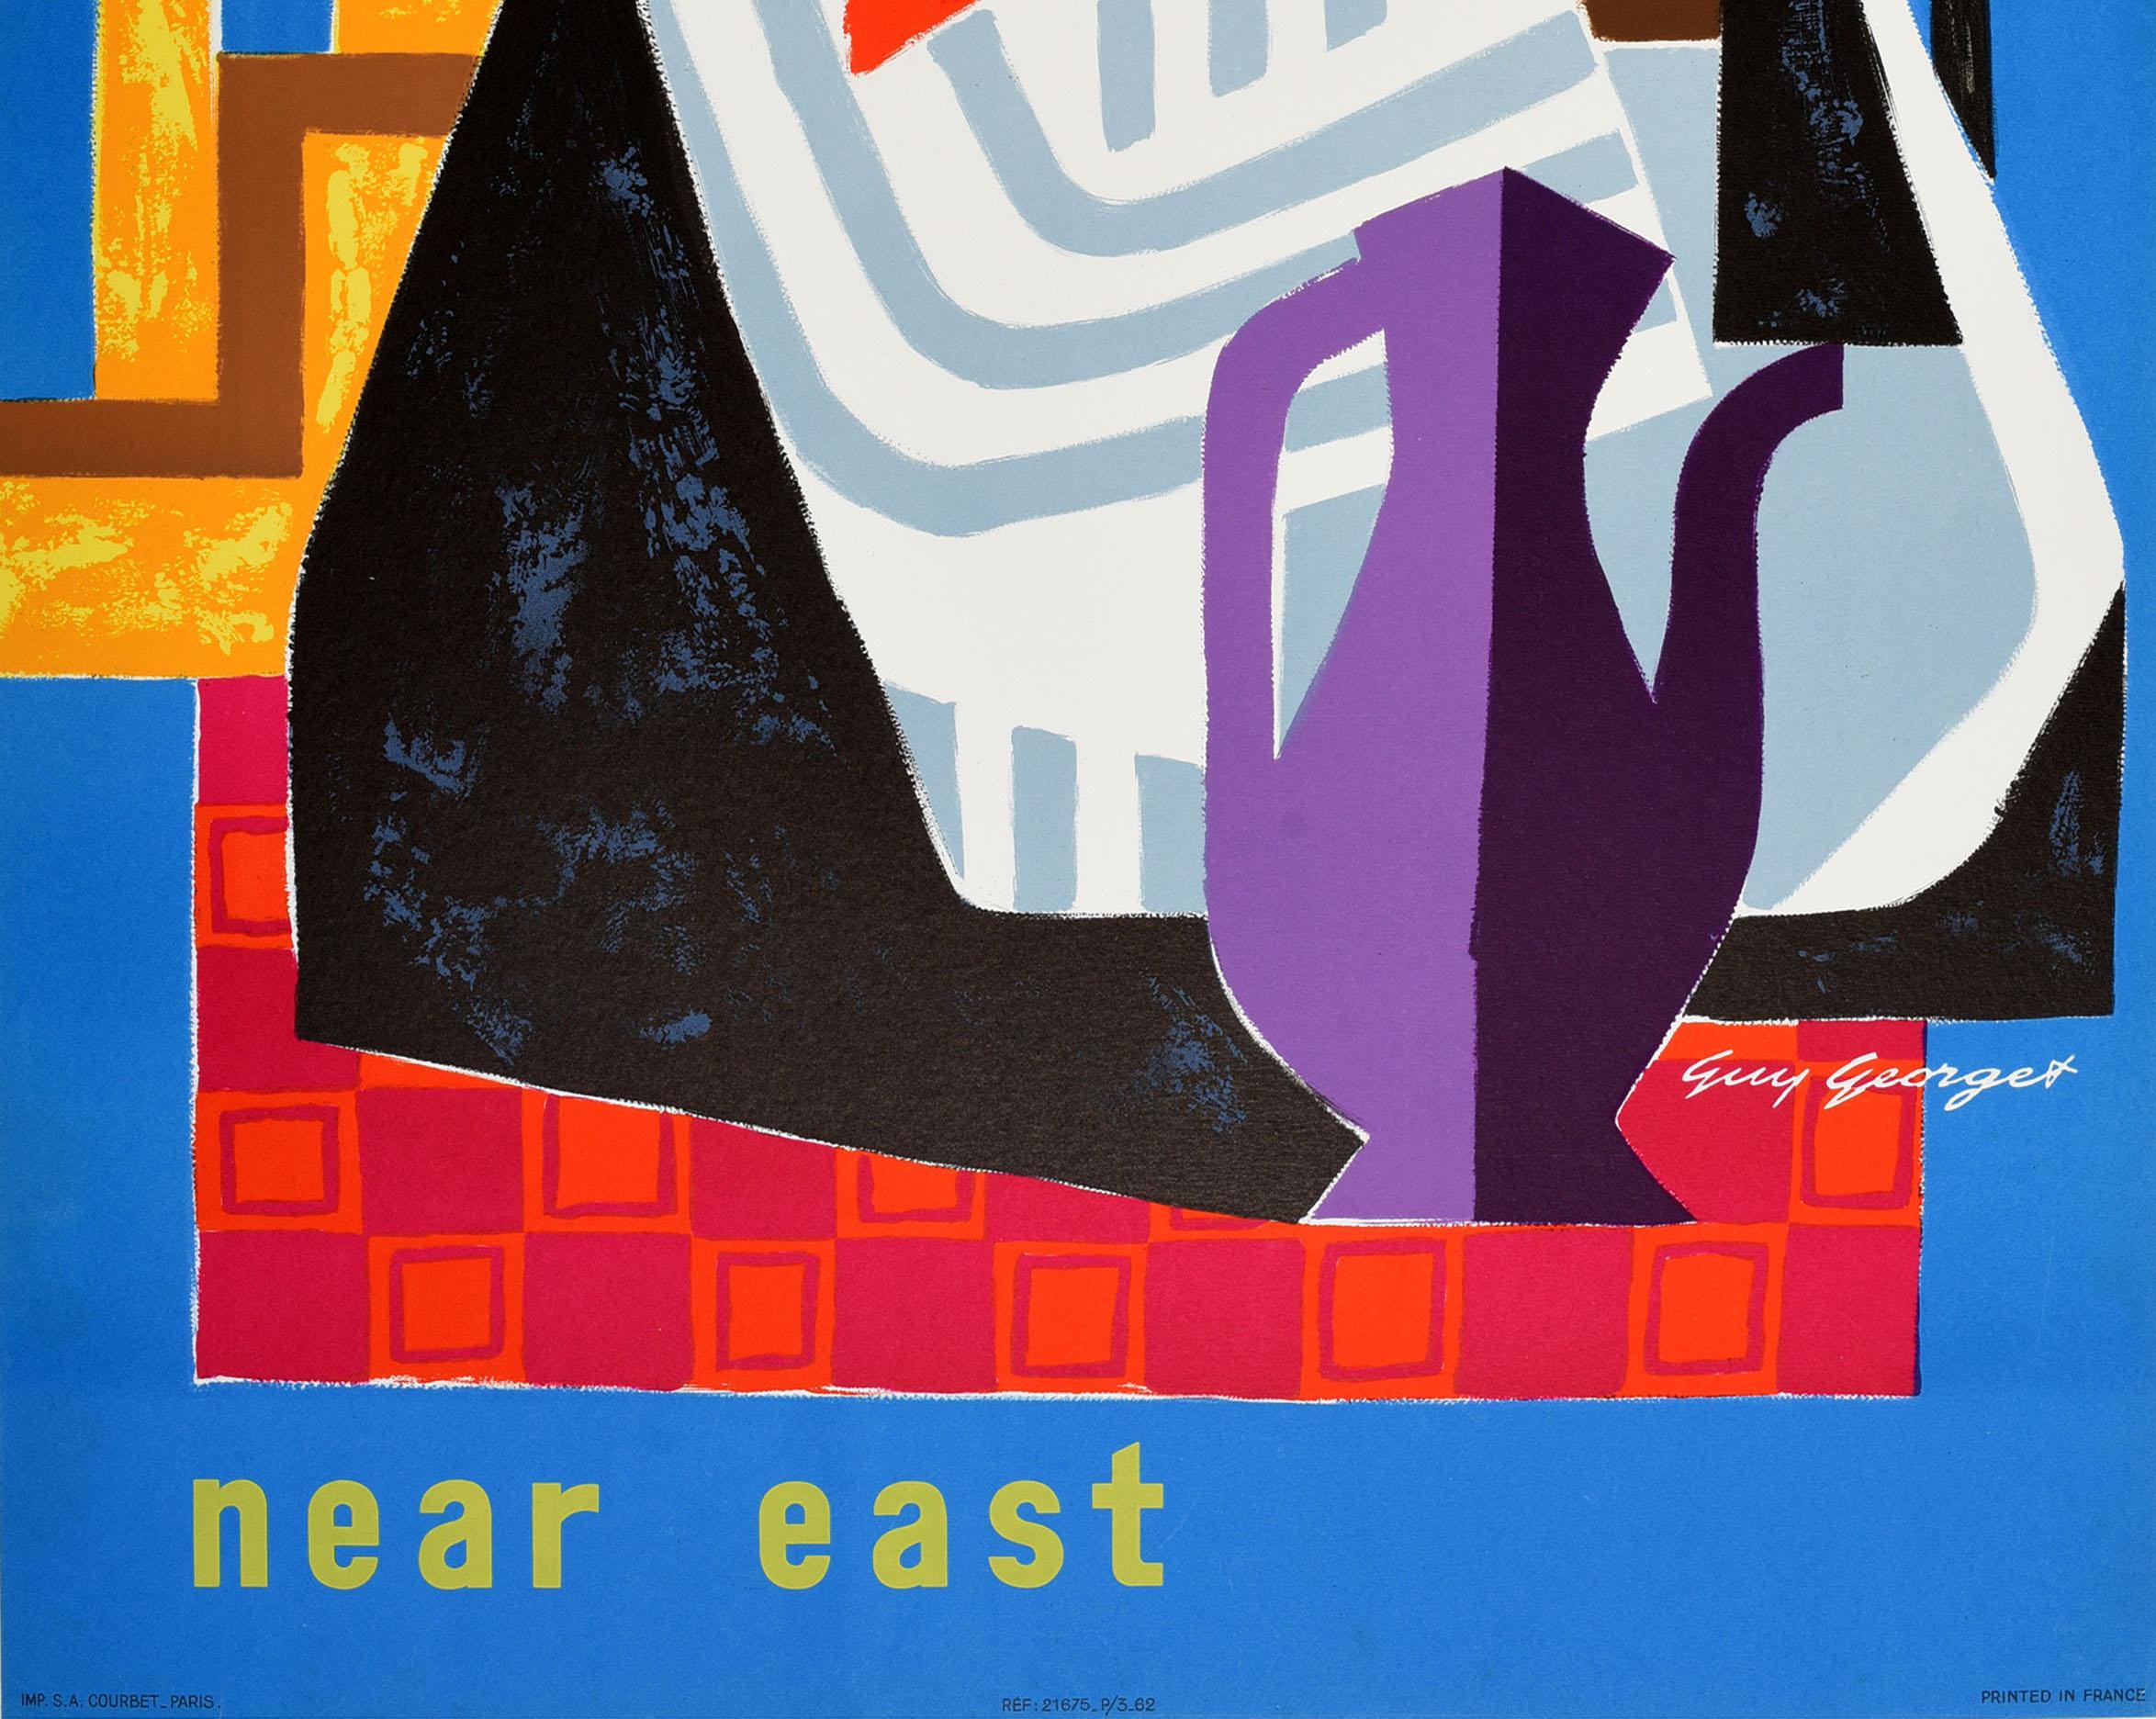 Original vintage travel advertising poster for Air France Near East featuring a colourful image by Guy Georget (1911-1992) of a figure in traditional clothing with minarets and an oil rig in the background. Excellent condition, restored small tears,